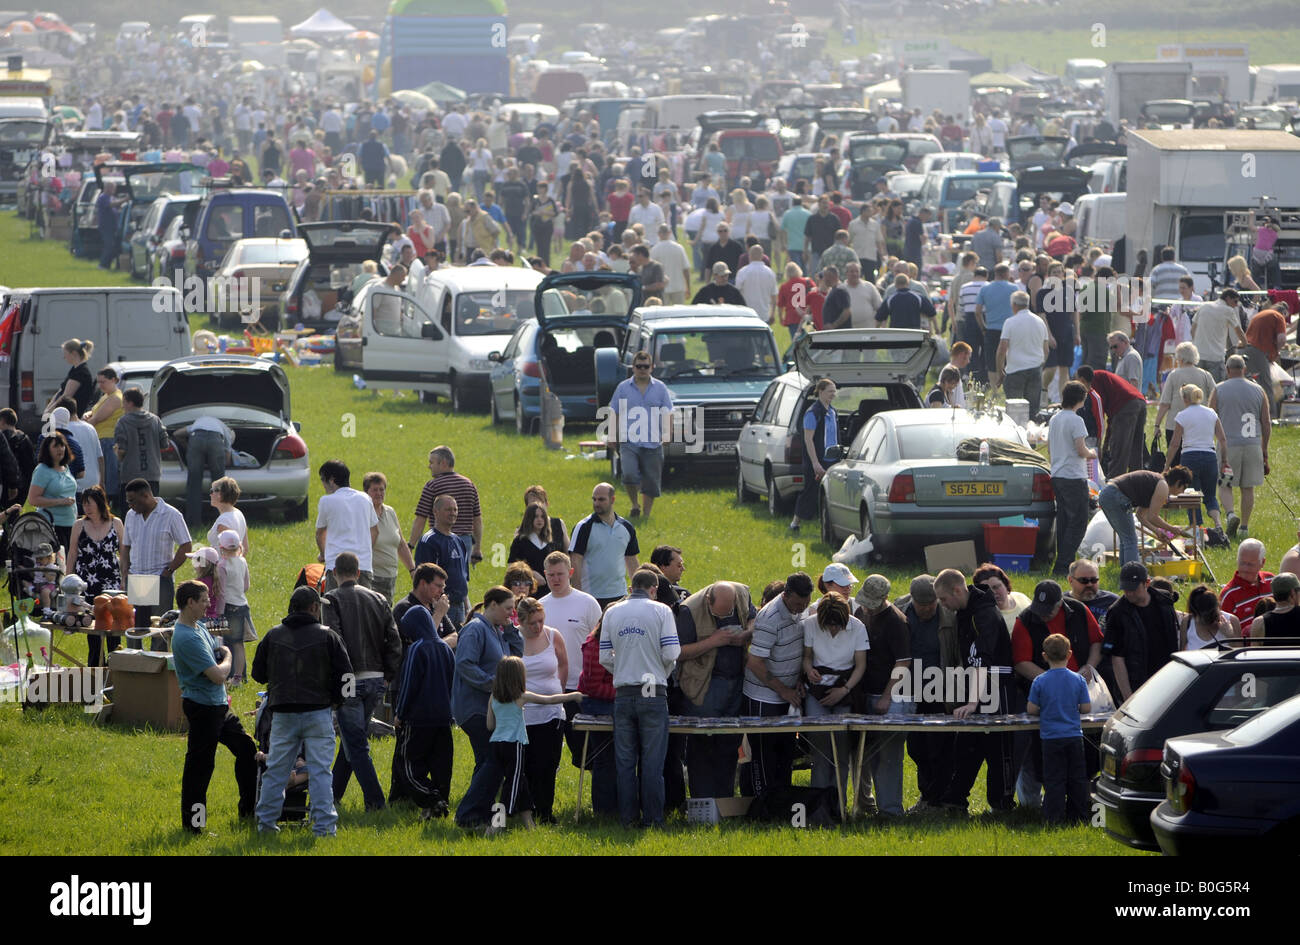 CROWDS AT A CAR BOOT SALE IN STAFFORDSHIRE,ENGLAND RE THE ECONOMY BUYING BARGAINS RECESSION MARKETS OUTDOOR HUNTERS ETC UK. Stock Photo